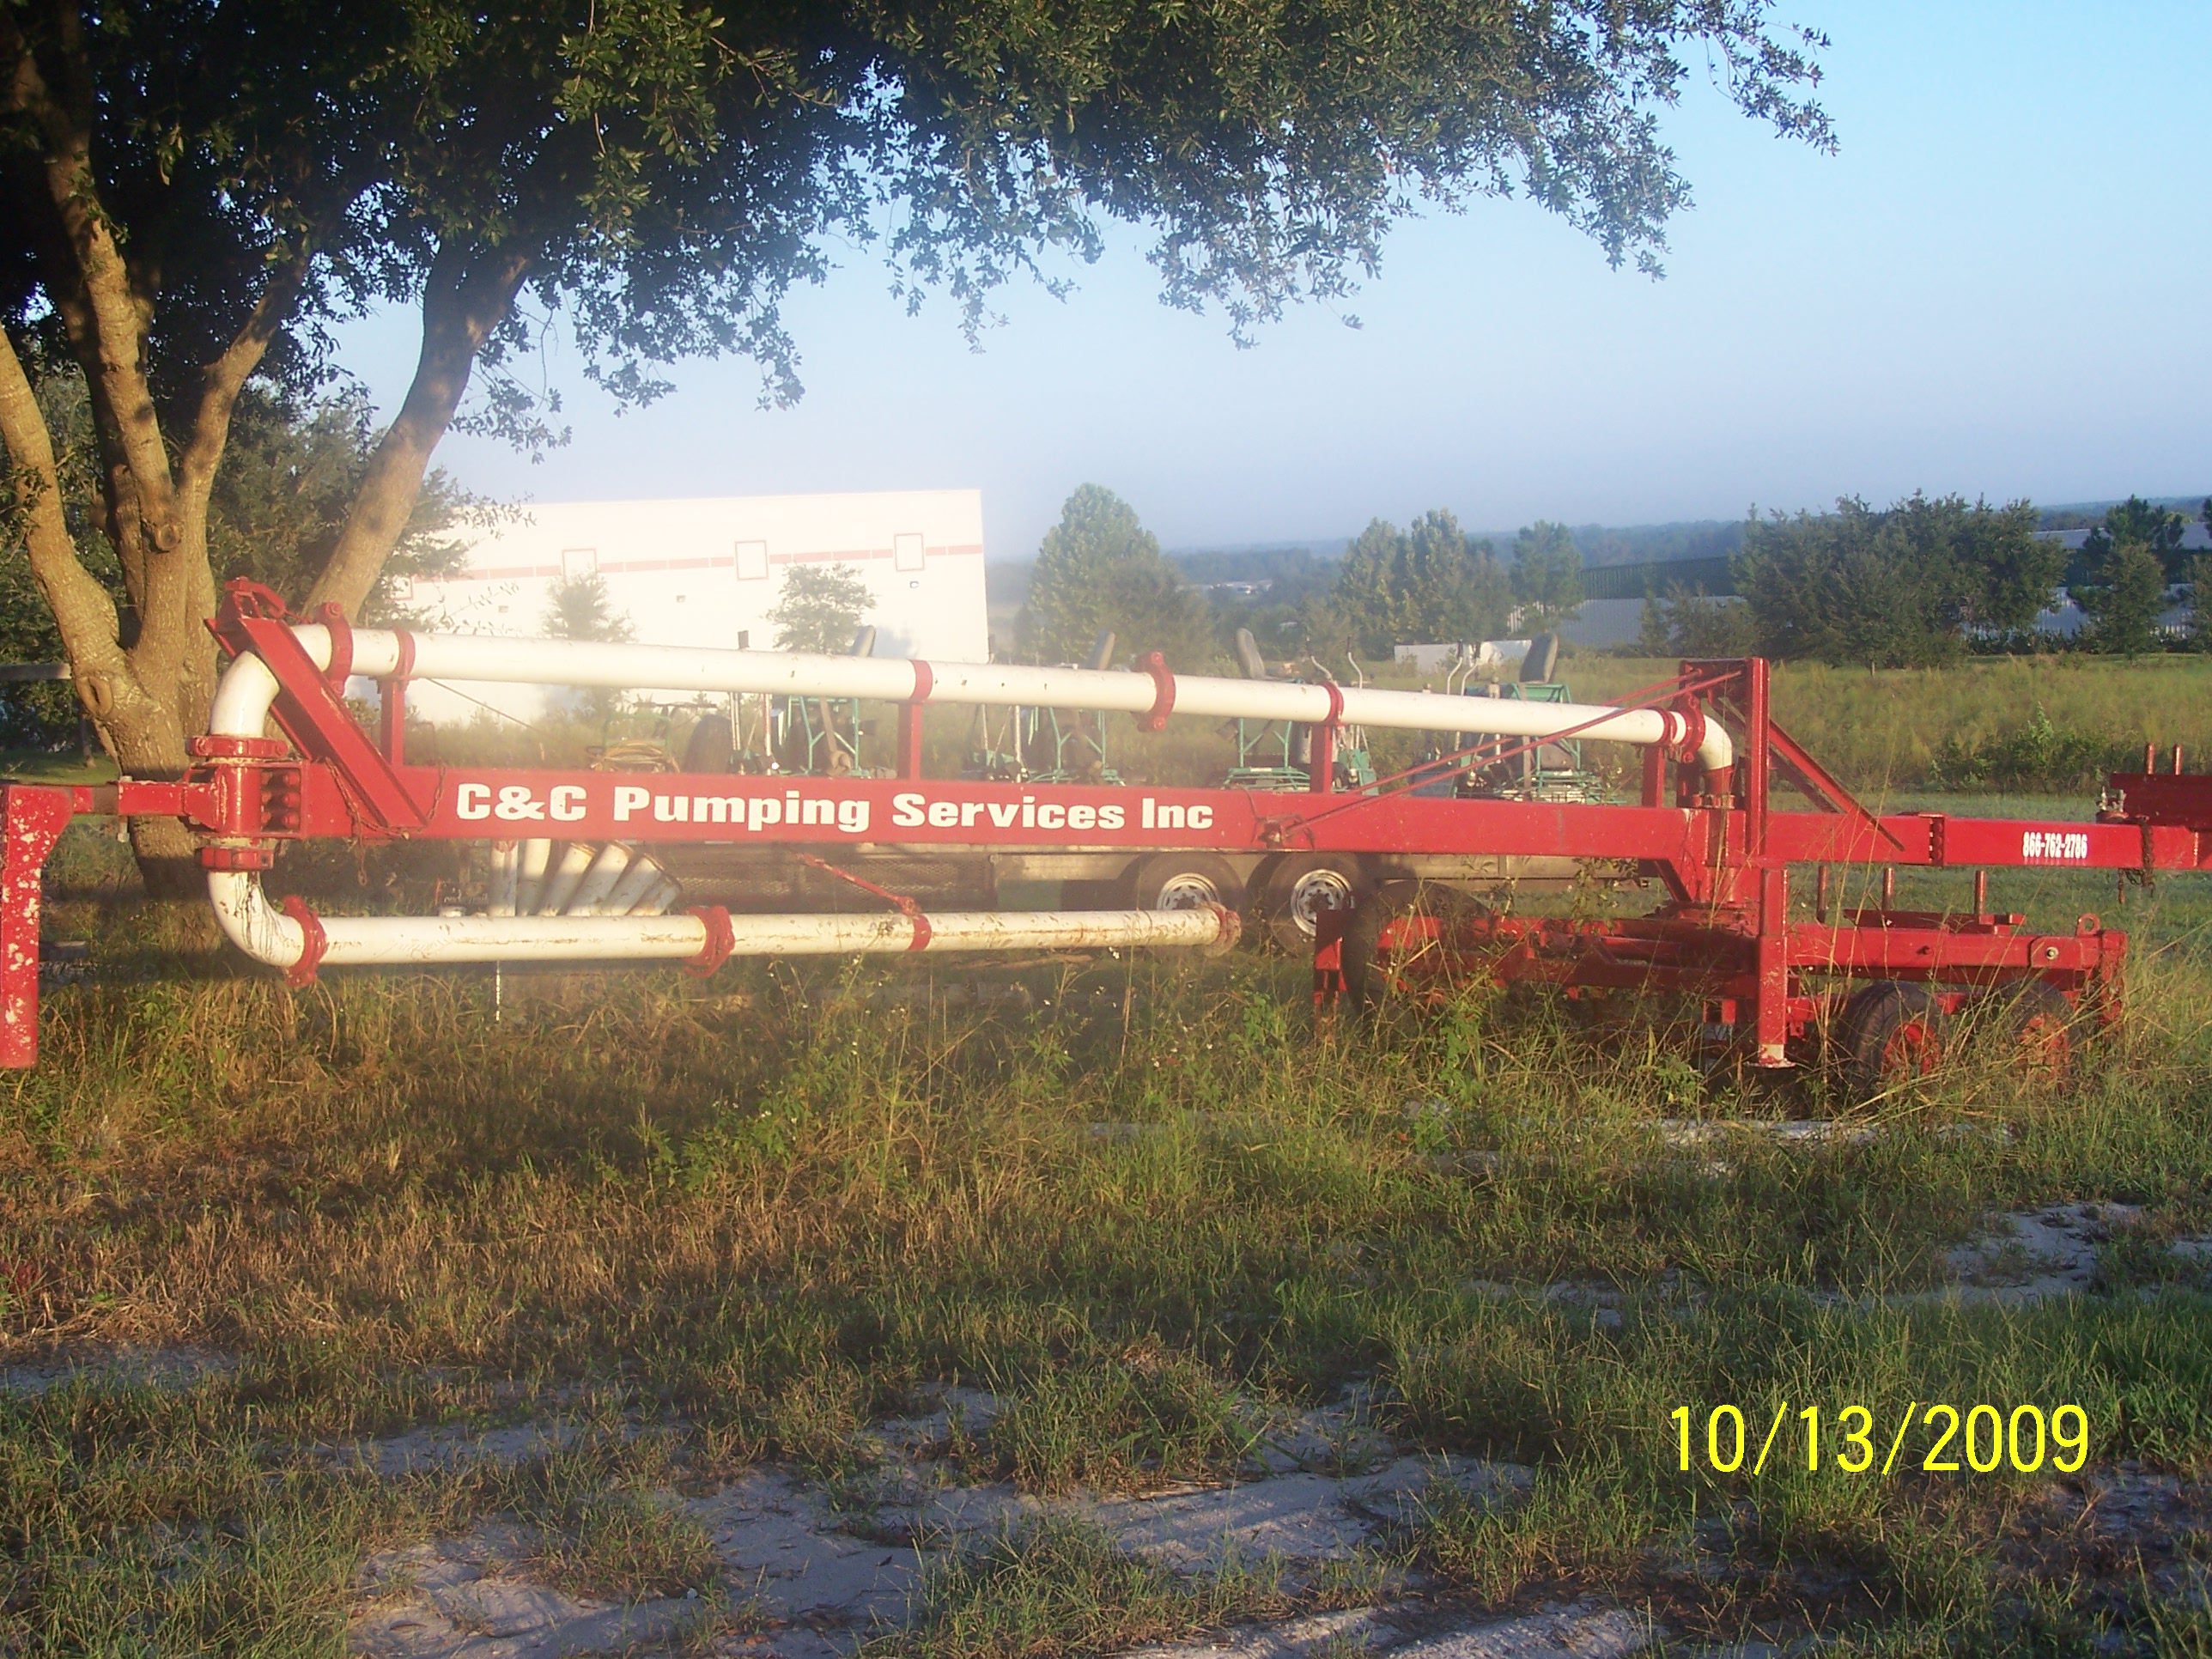 Mini Placing Concrete Boom provided by C&C Pumping Services Inc. 